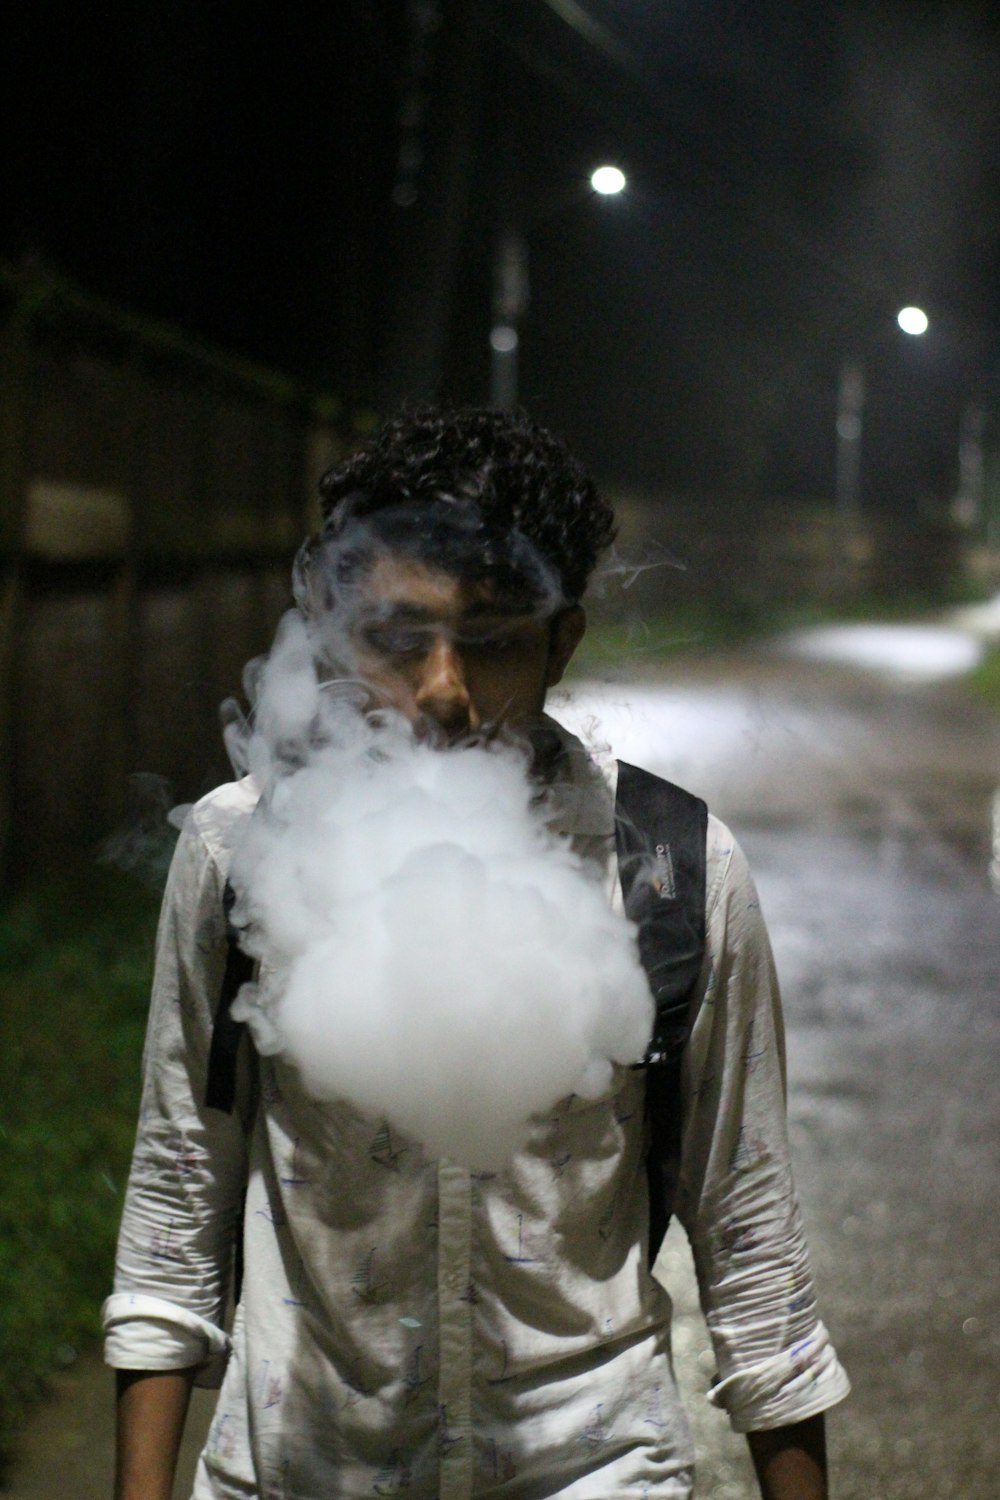 a man walking down a street with a cloud of smoke coming out of his mouth